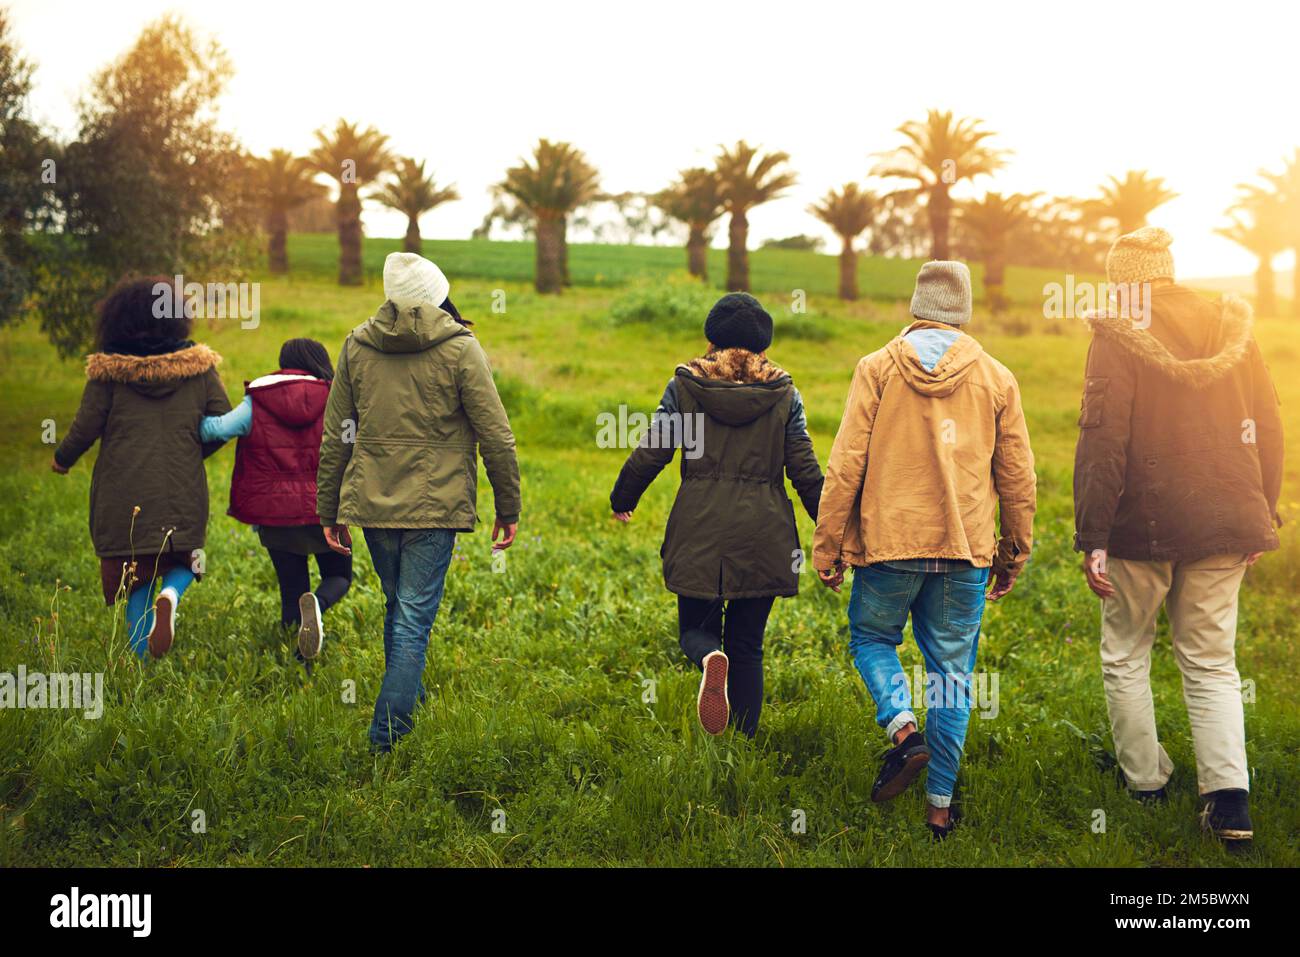 Not all who wander are lost. Rearview shot of a group of friends walking through a field together. Stock Photo